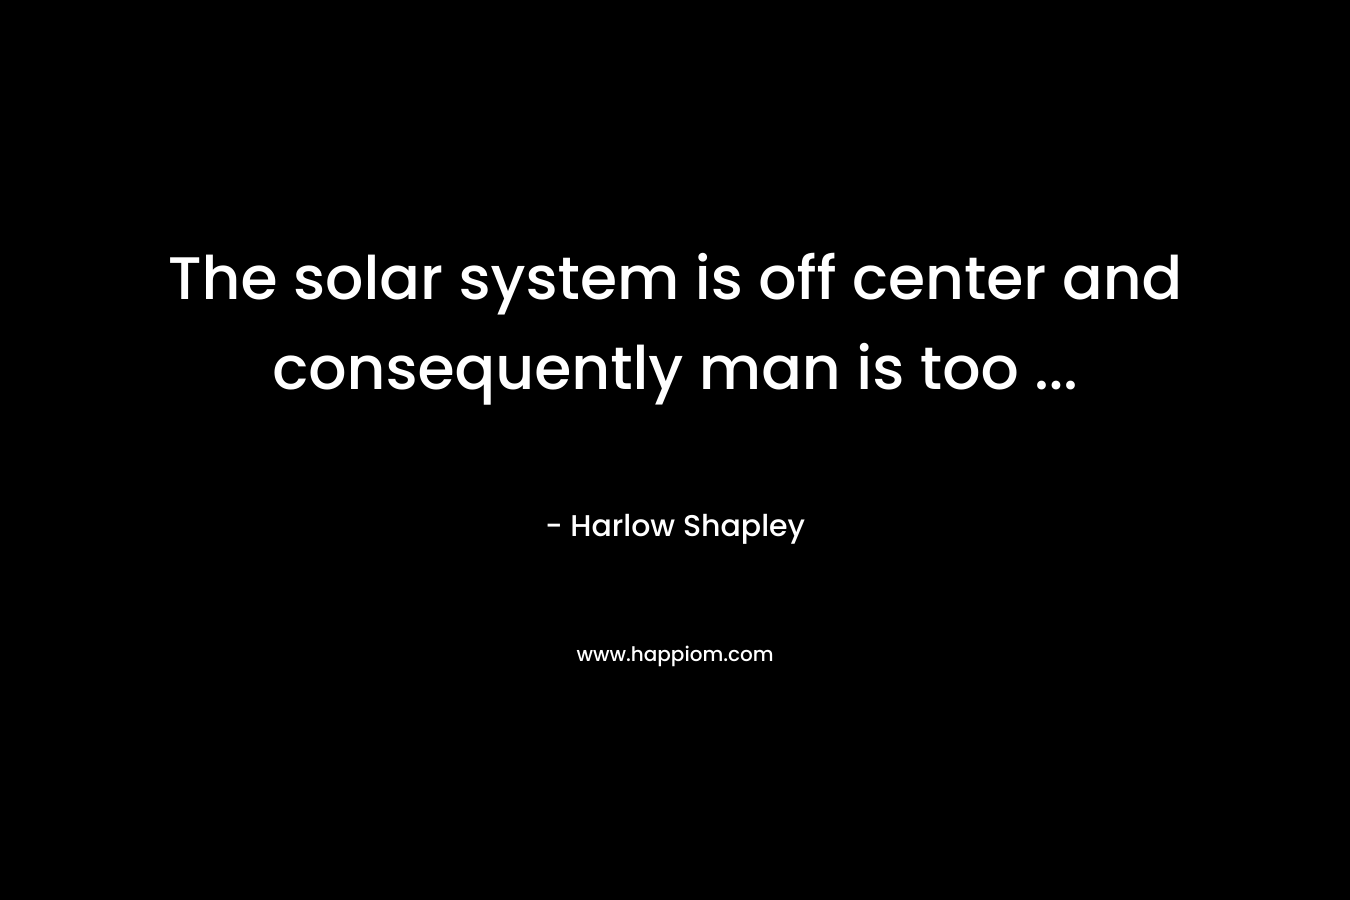 The solar system is off center and consequently man is too ...